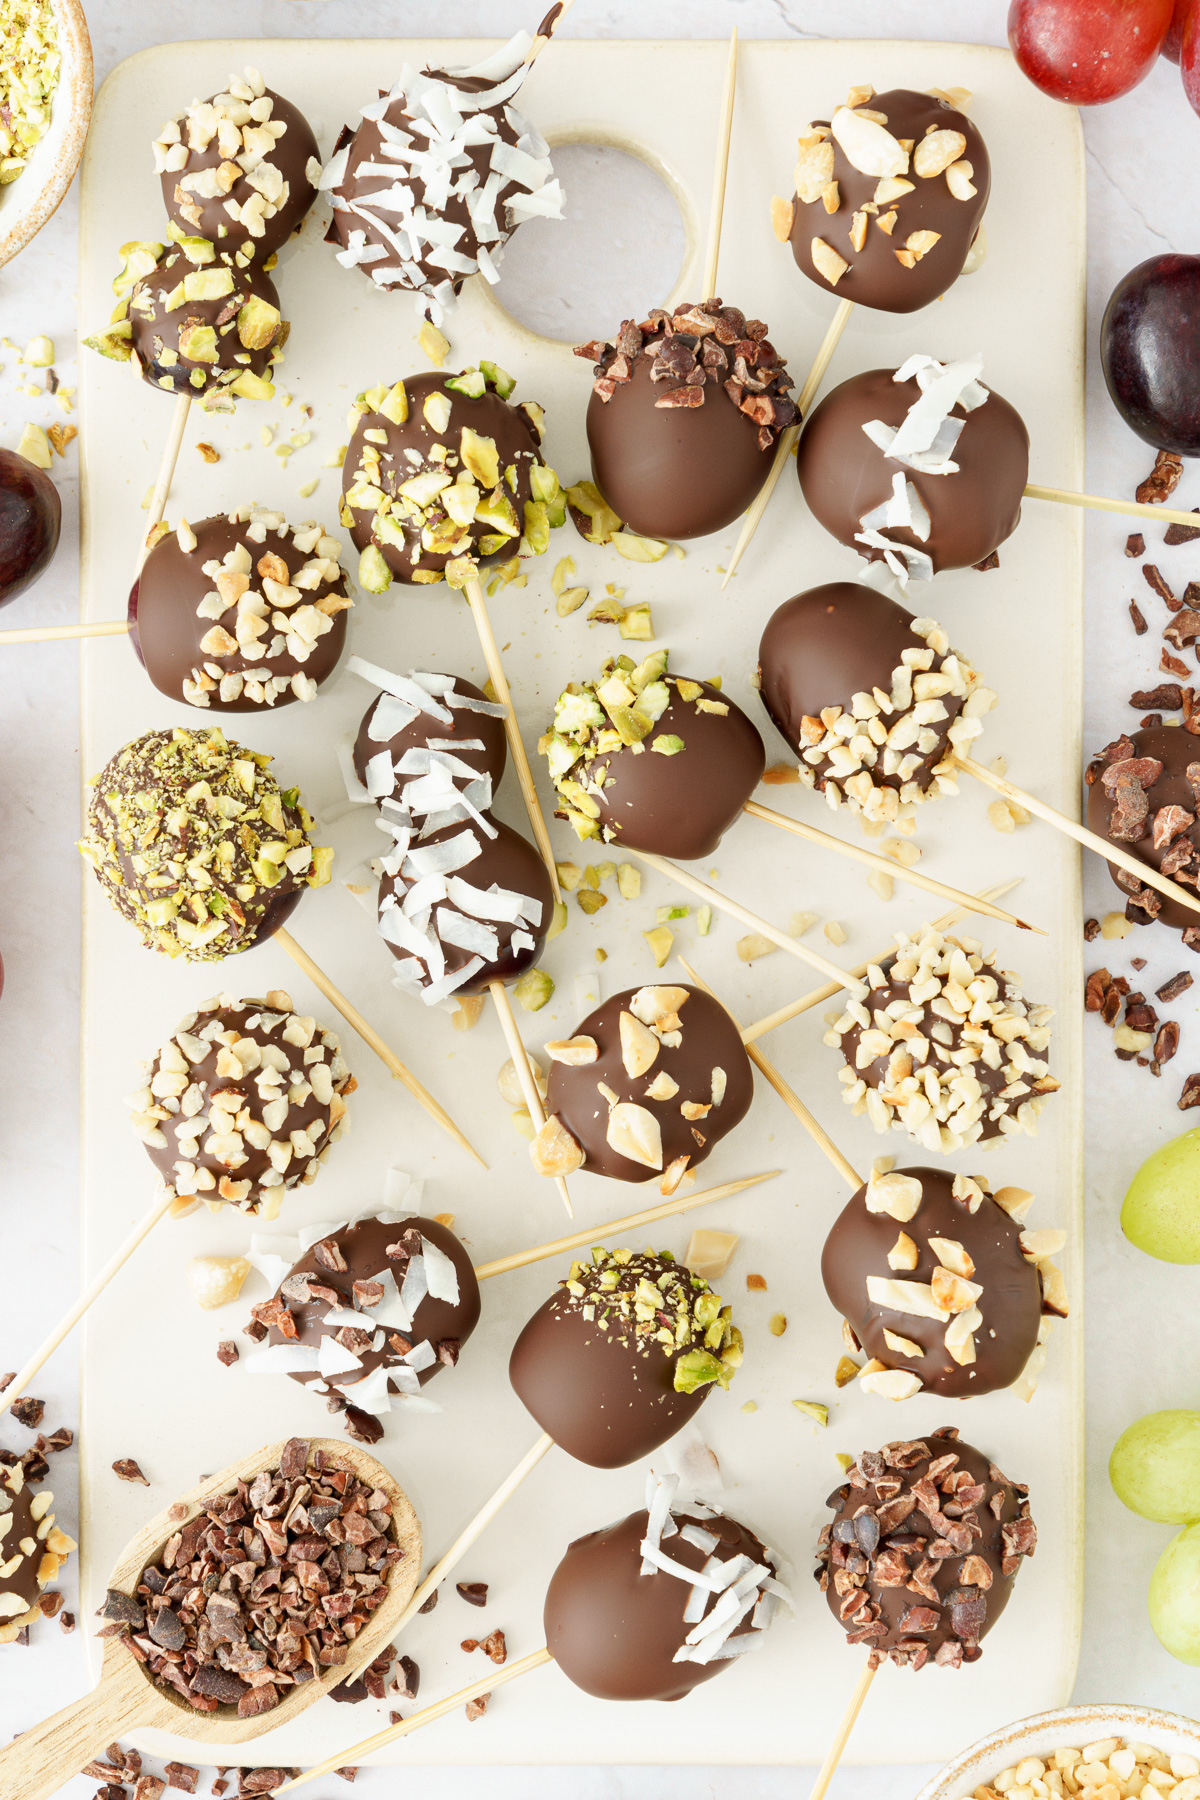 Skewers with chocolate-covered grapes, garnished with nuts, shredded coconut, and crushed chocolate.